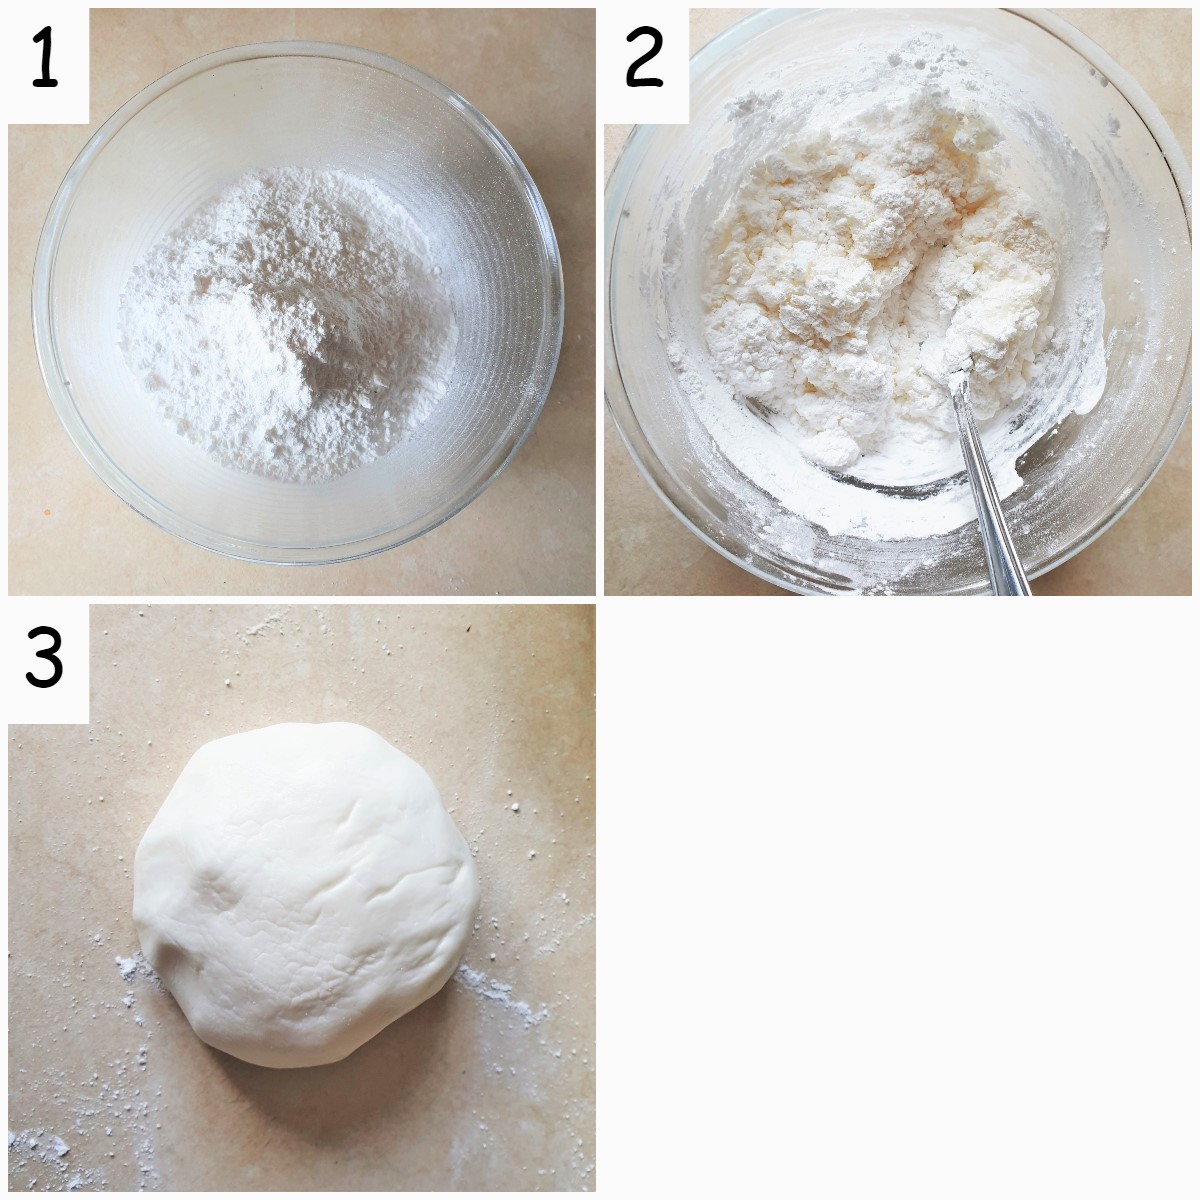 Steps for mixing microwave meringues.